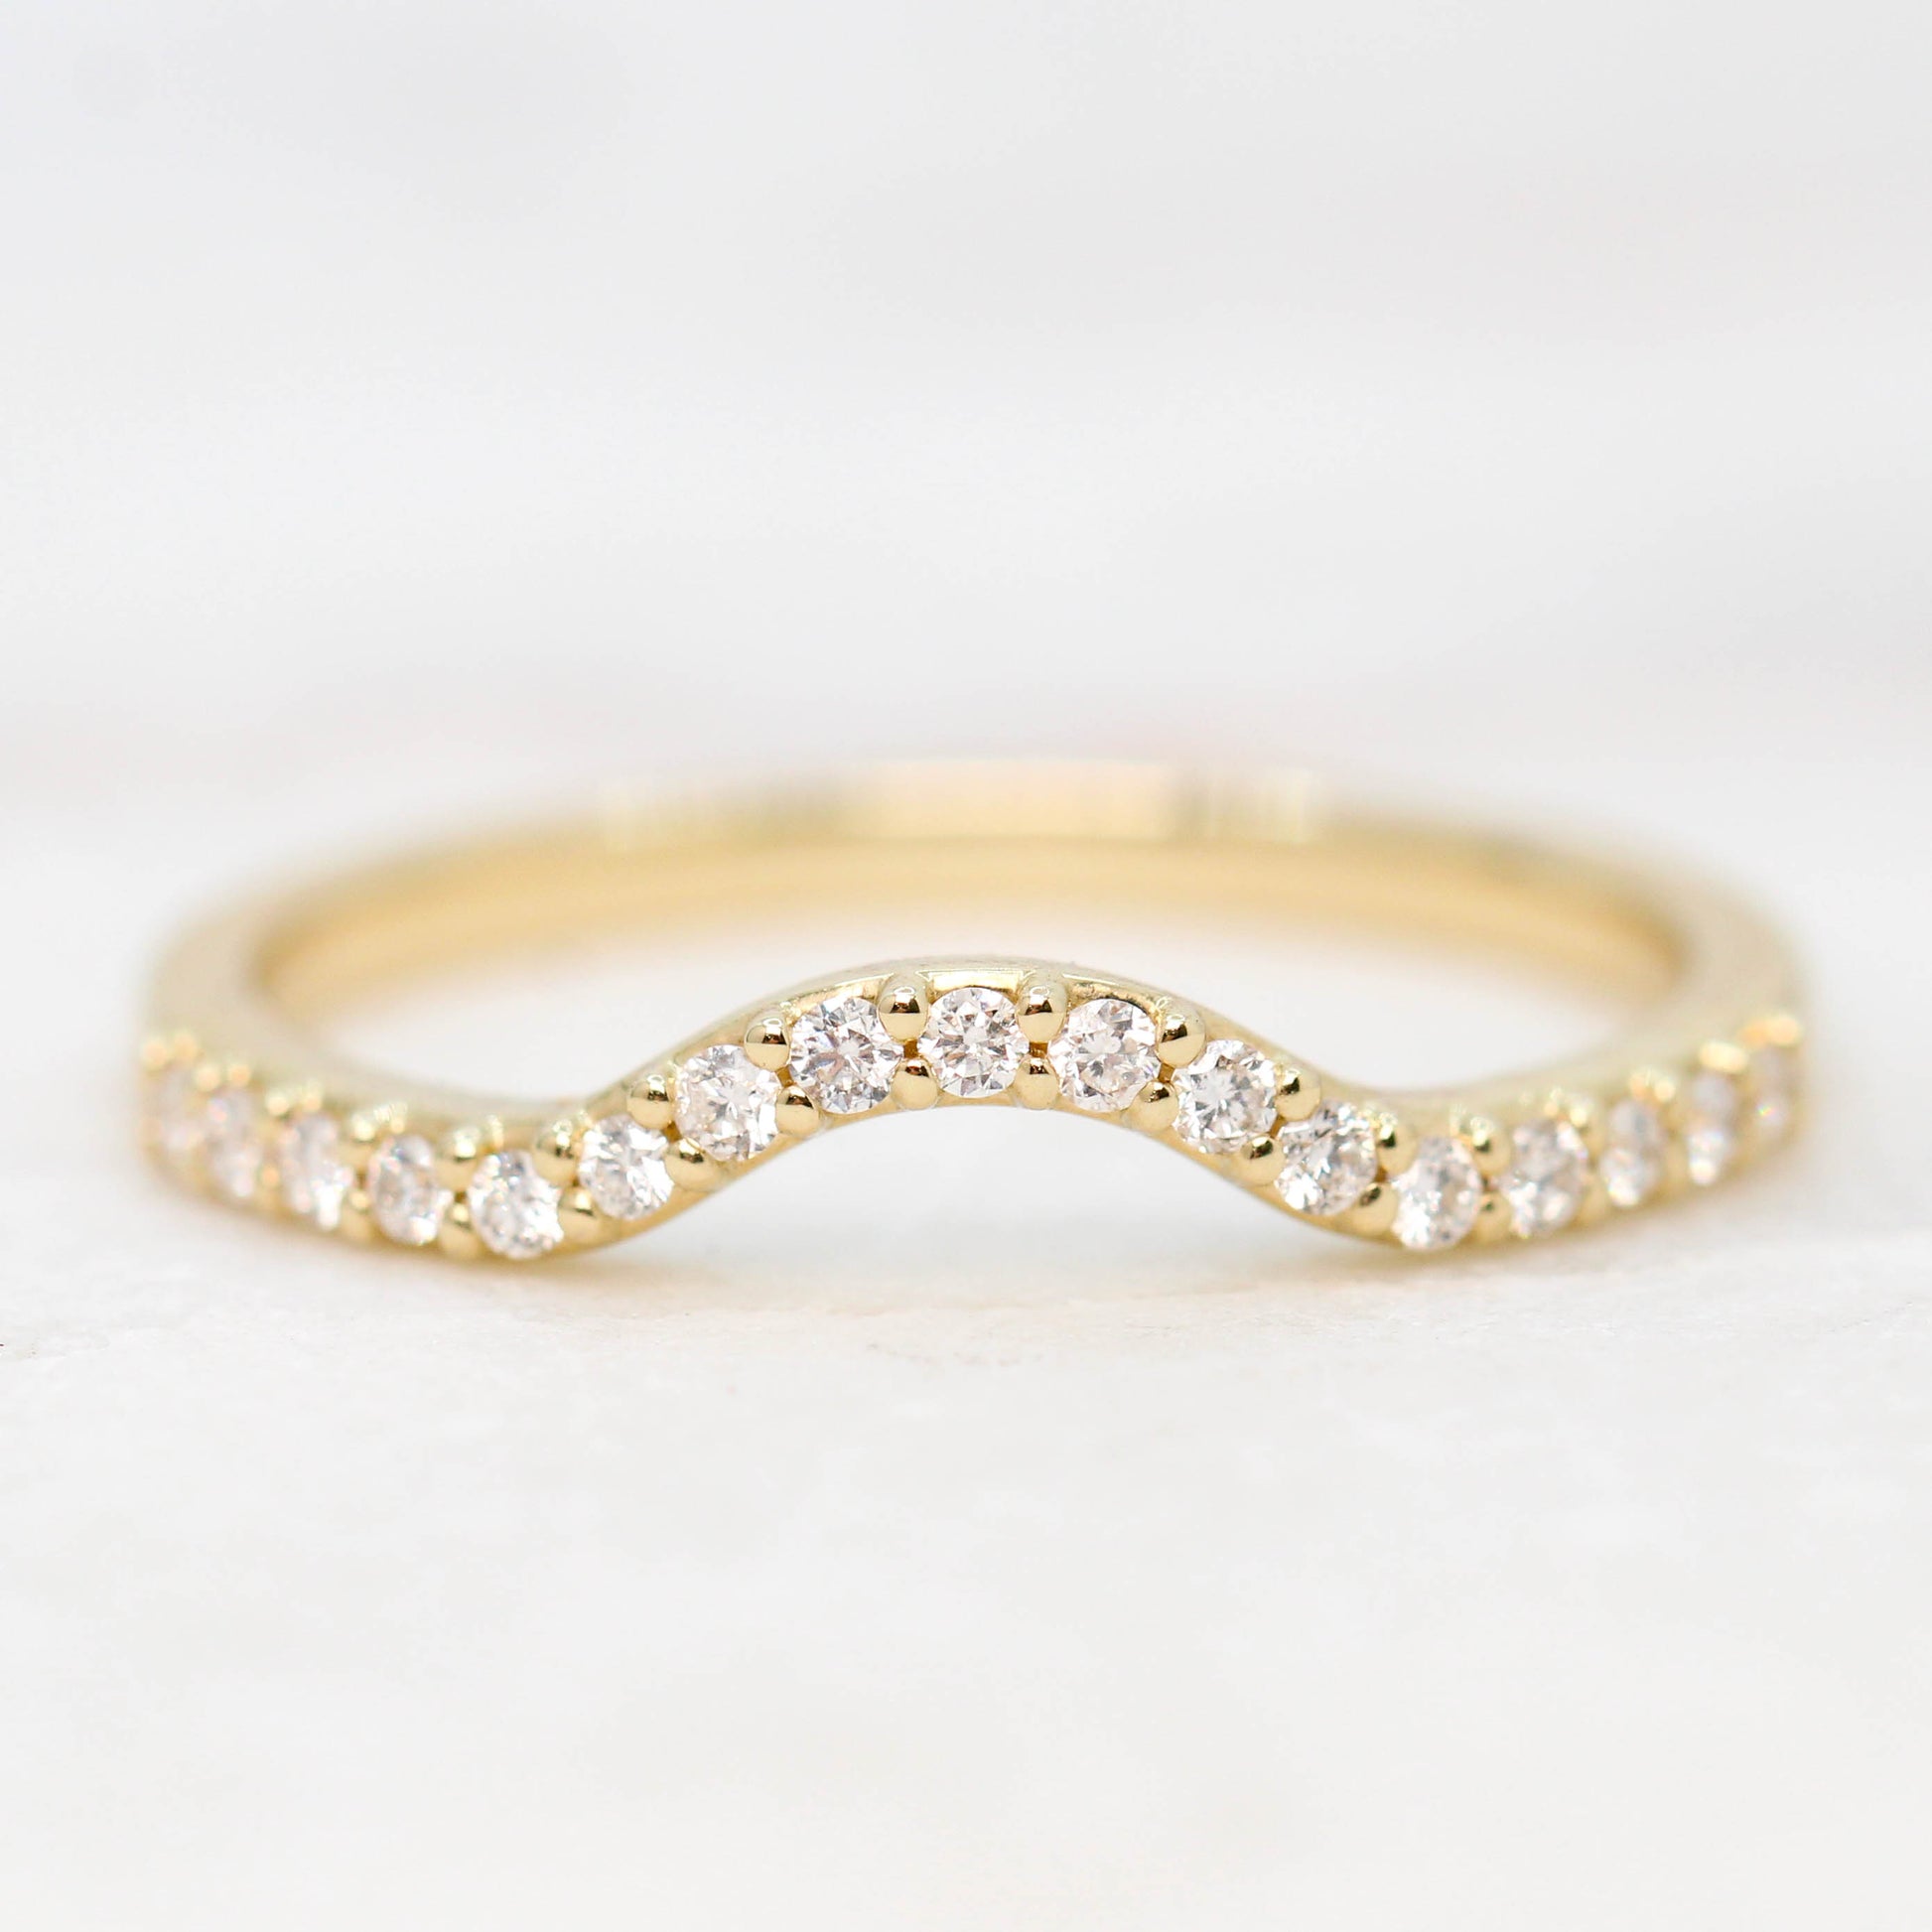 Walsh Wedding Band - Curved Contour Diamond Band - 14K Gold of Choice - Midwinter Co. Alternative Bridal Rings and Modern Fine Jewelry